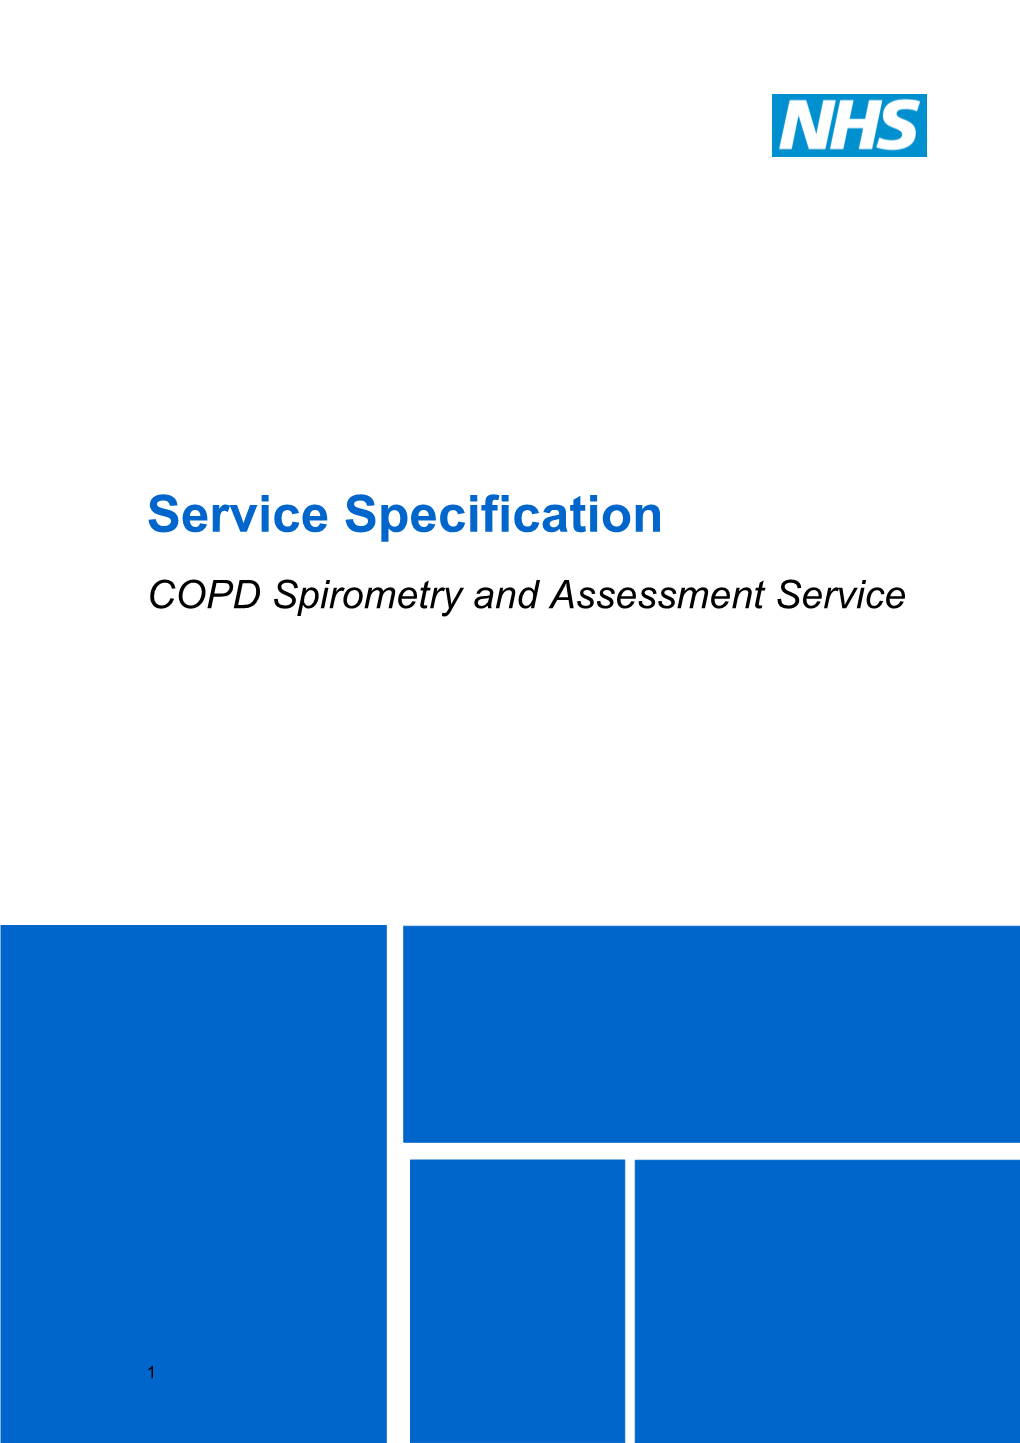 Service Specification: COPD Spirometry and Assessment Service